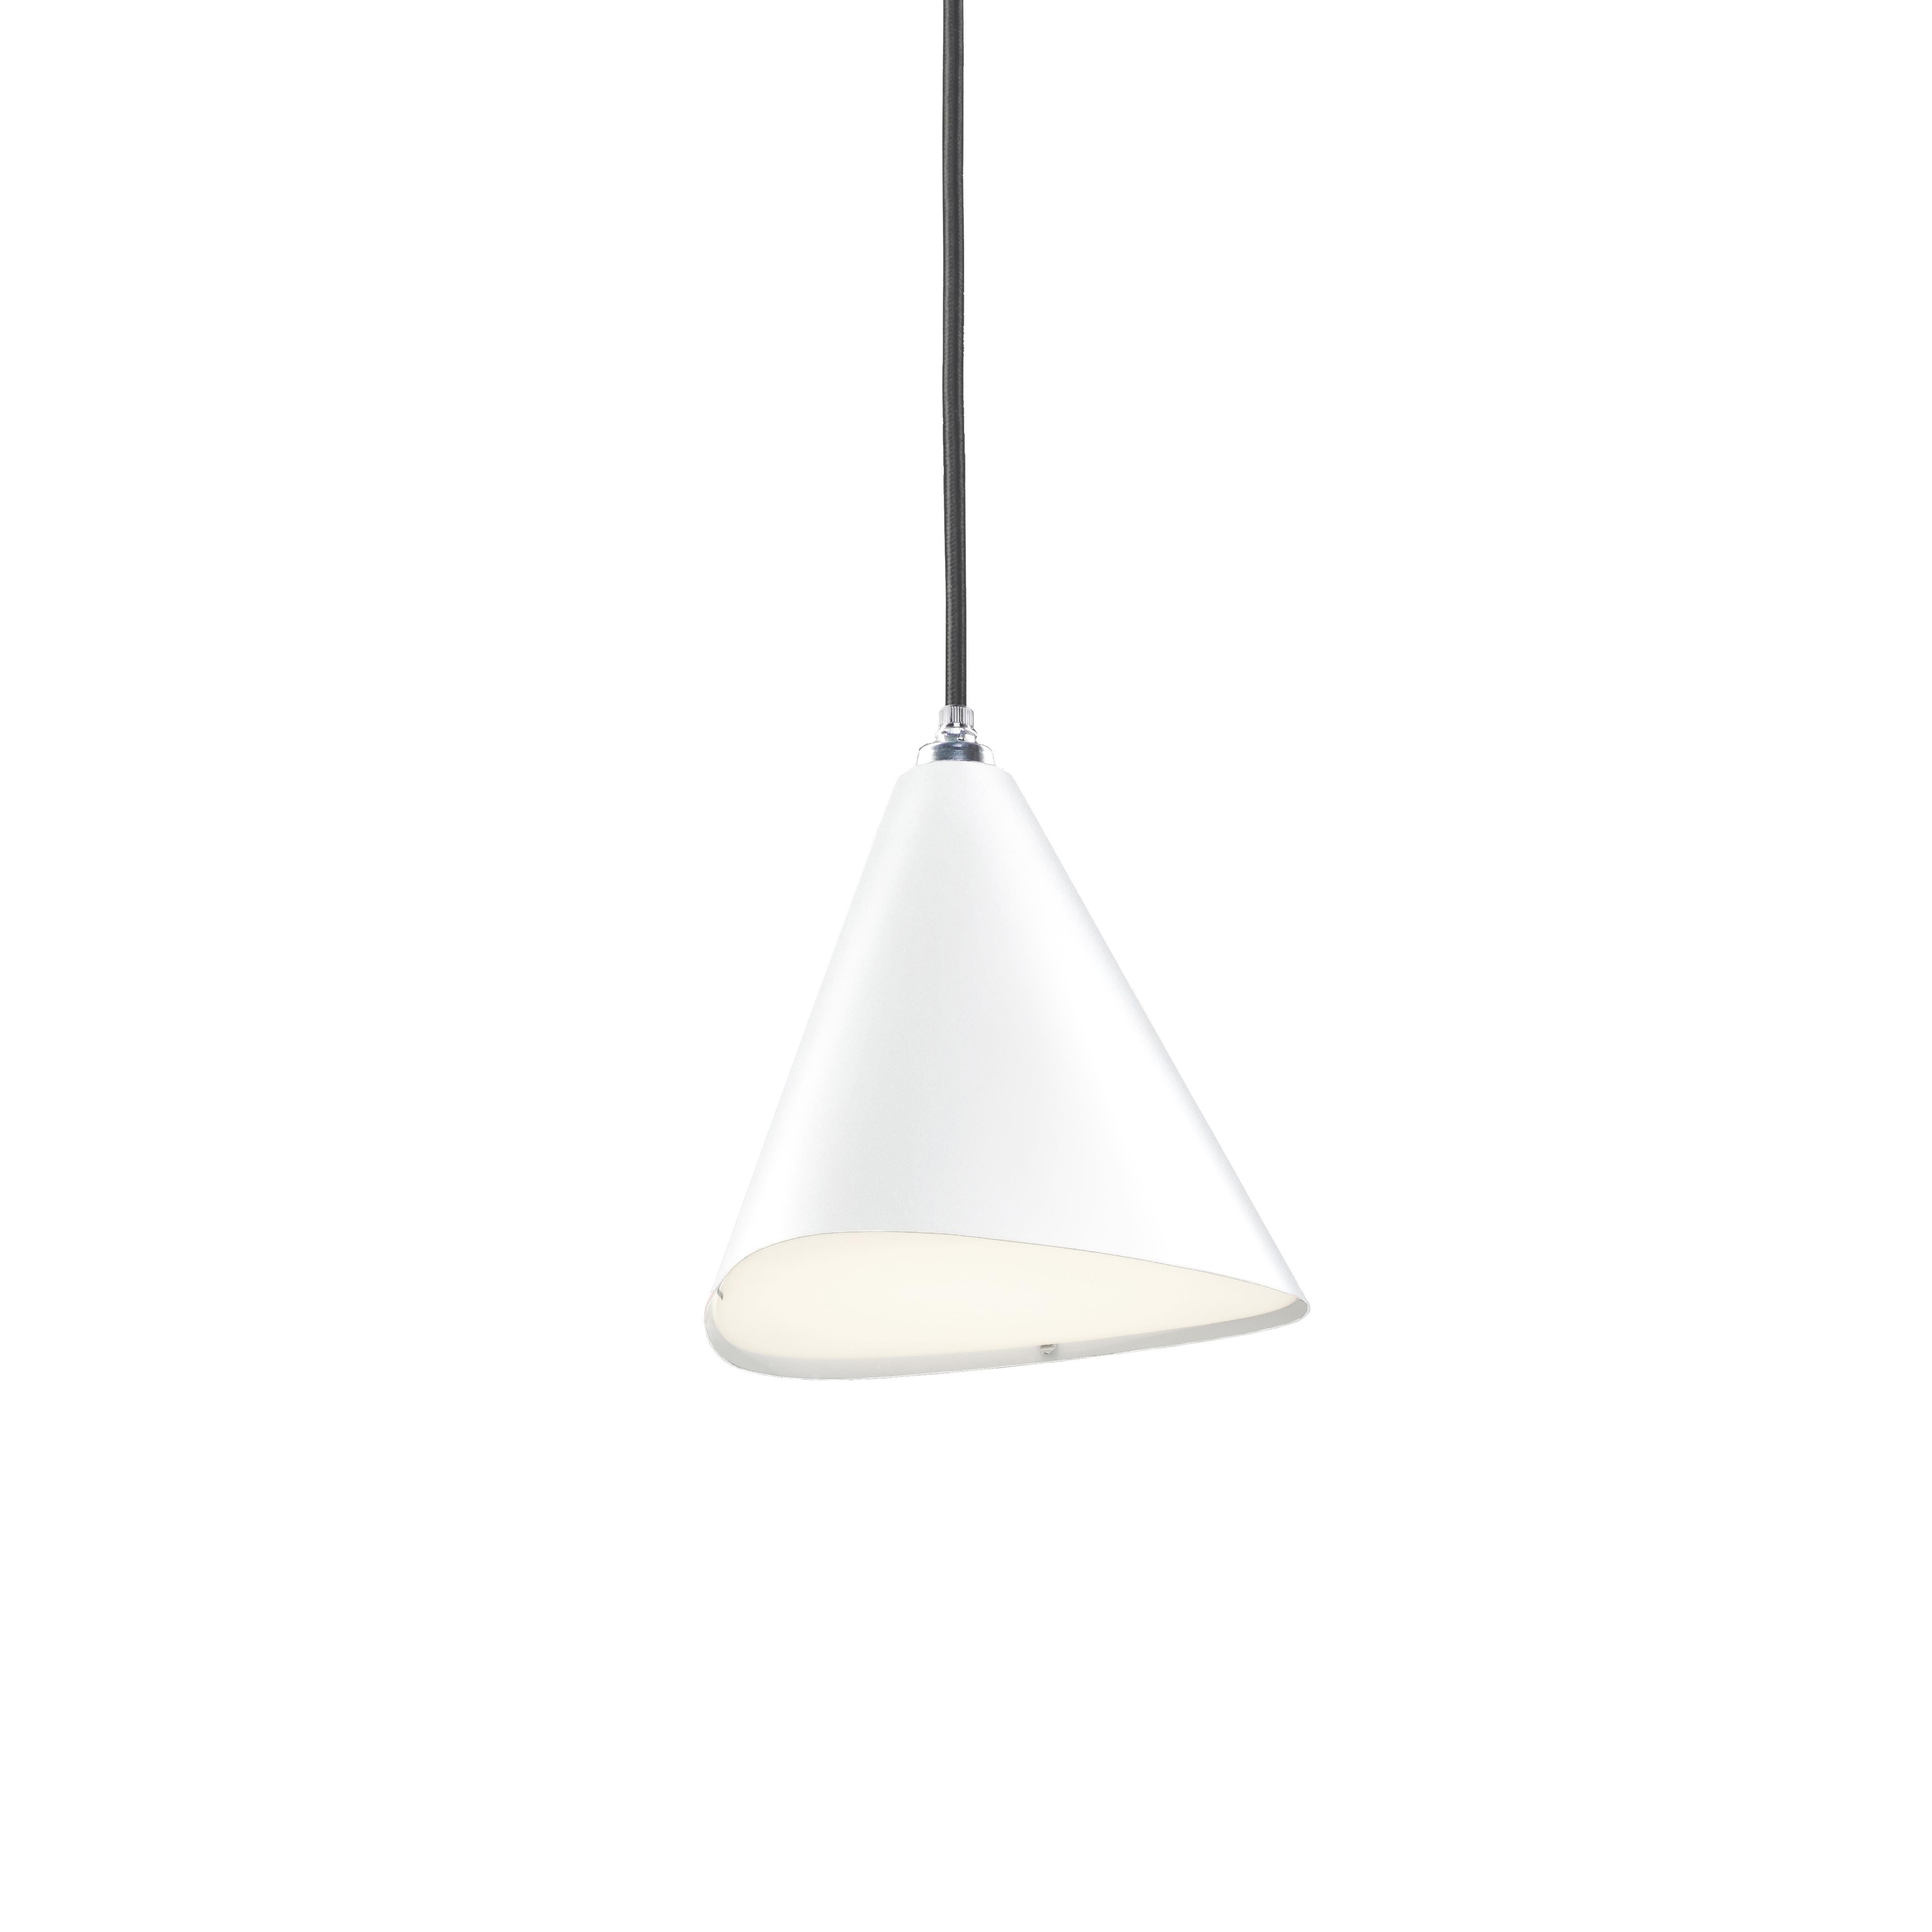 Daniel Becker 'Emily III' Pendant Lamp in Anthracite For Sale 2